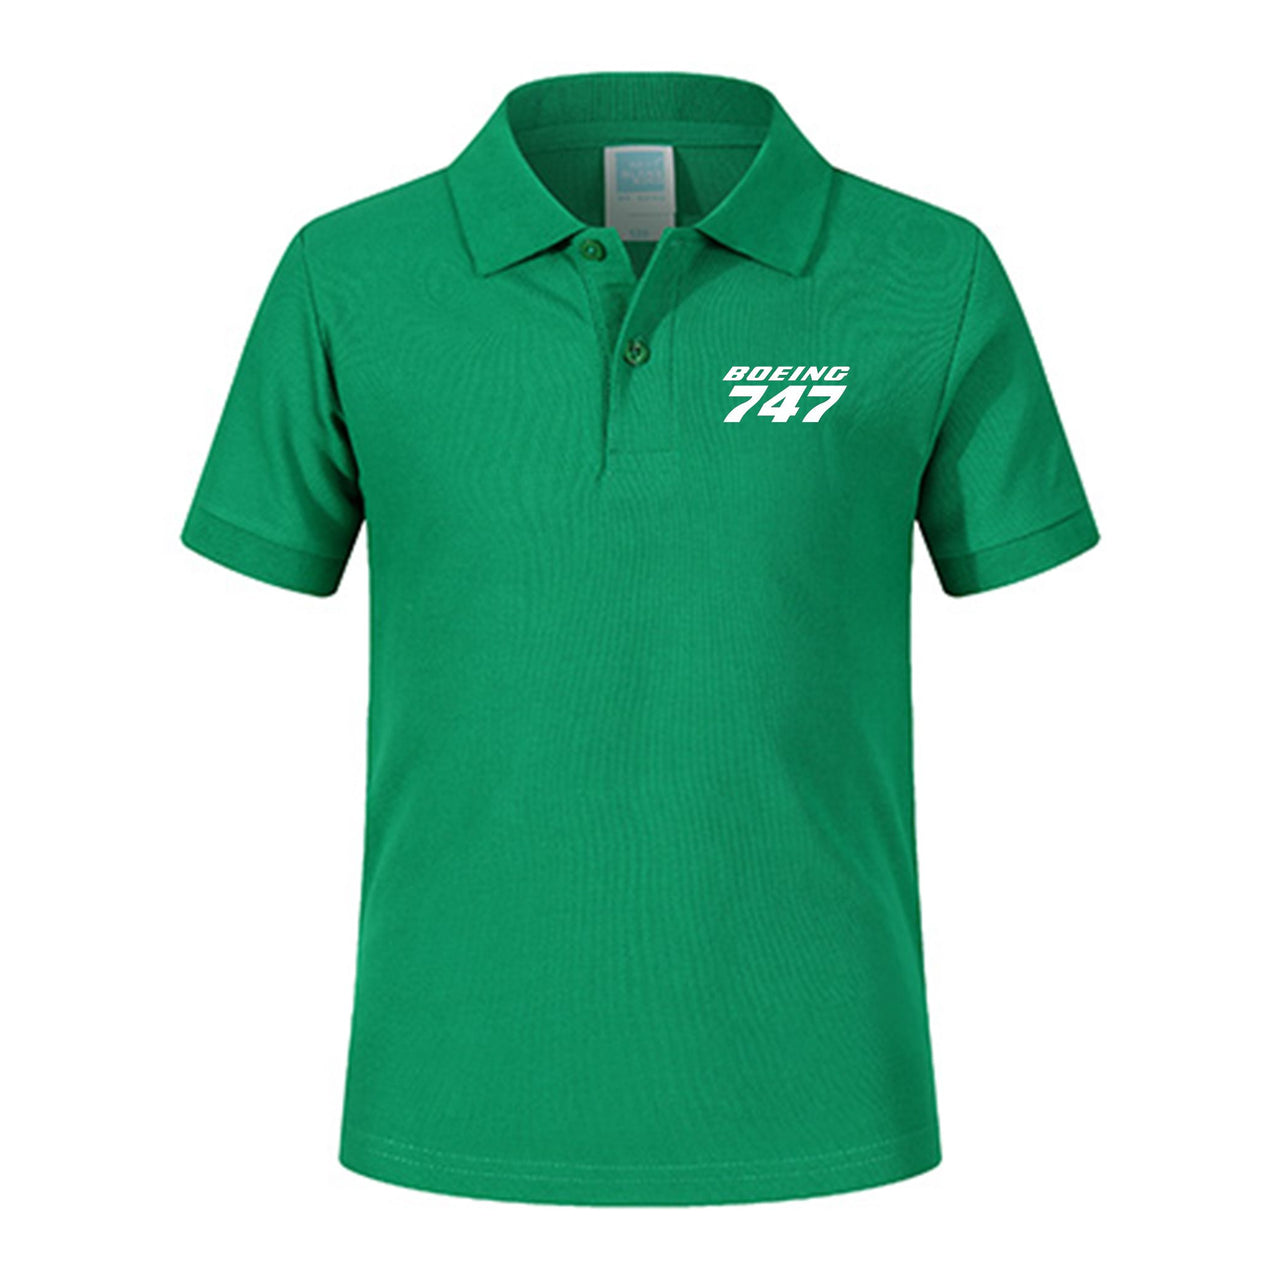 Boeing 747 & Text Designed Children Polo T-Shirts